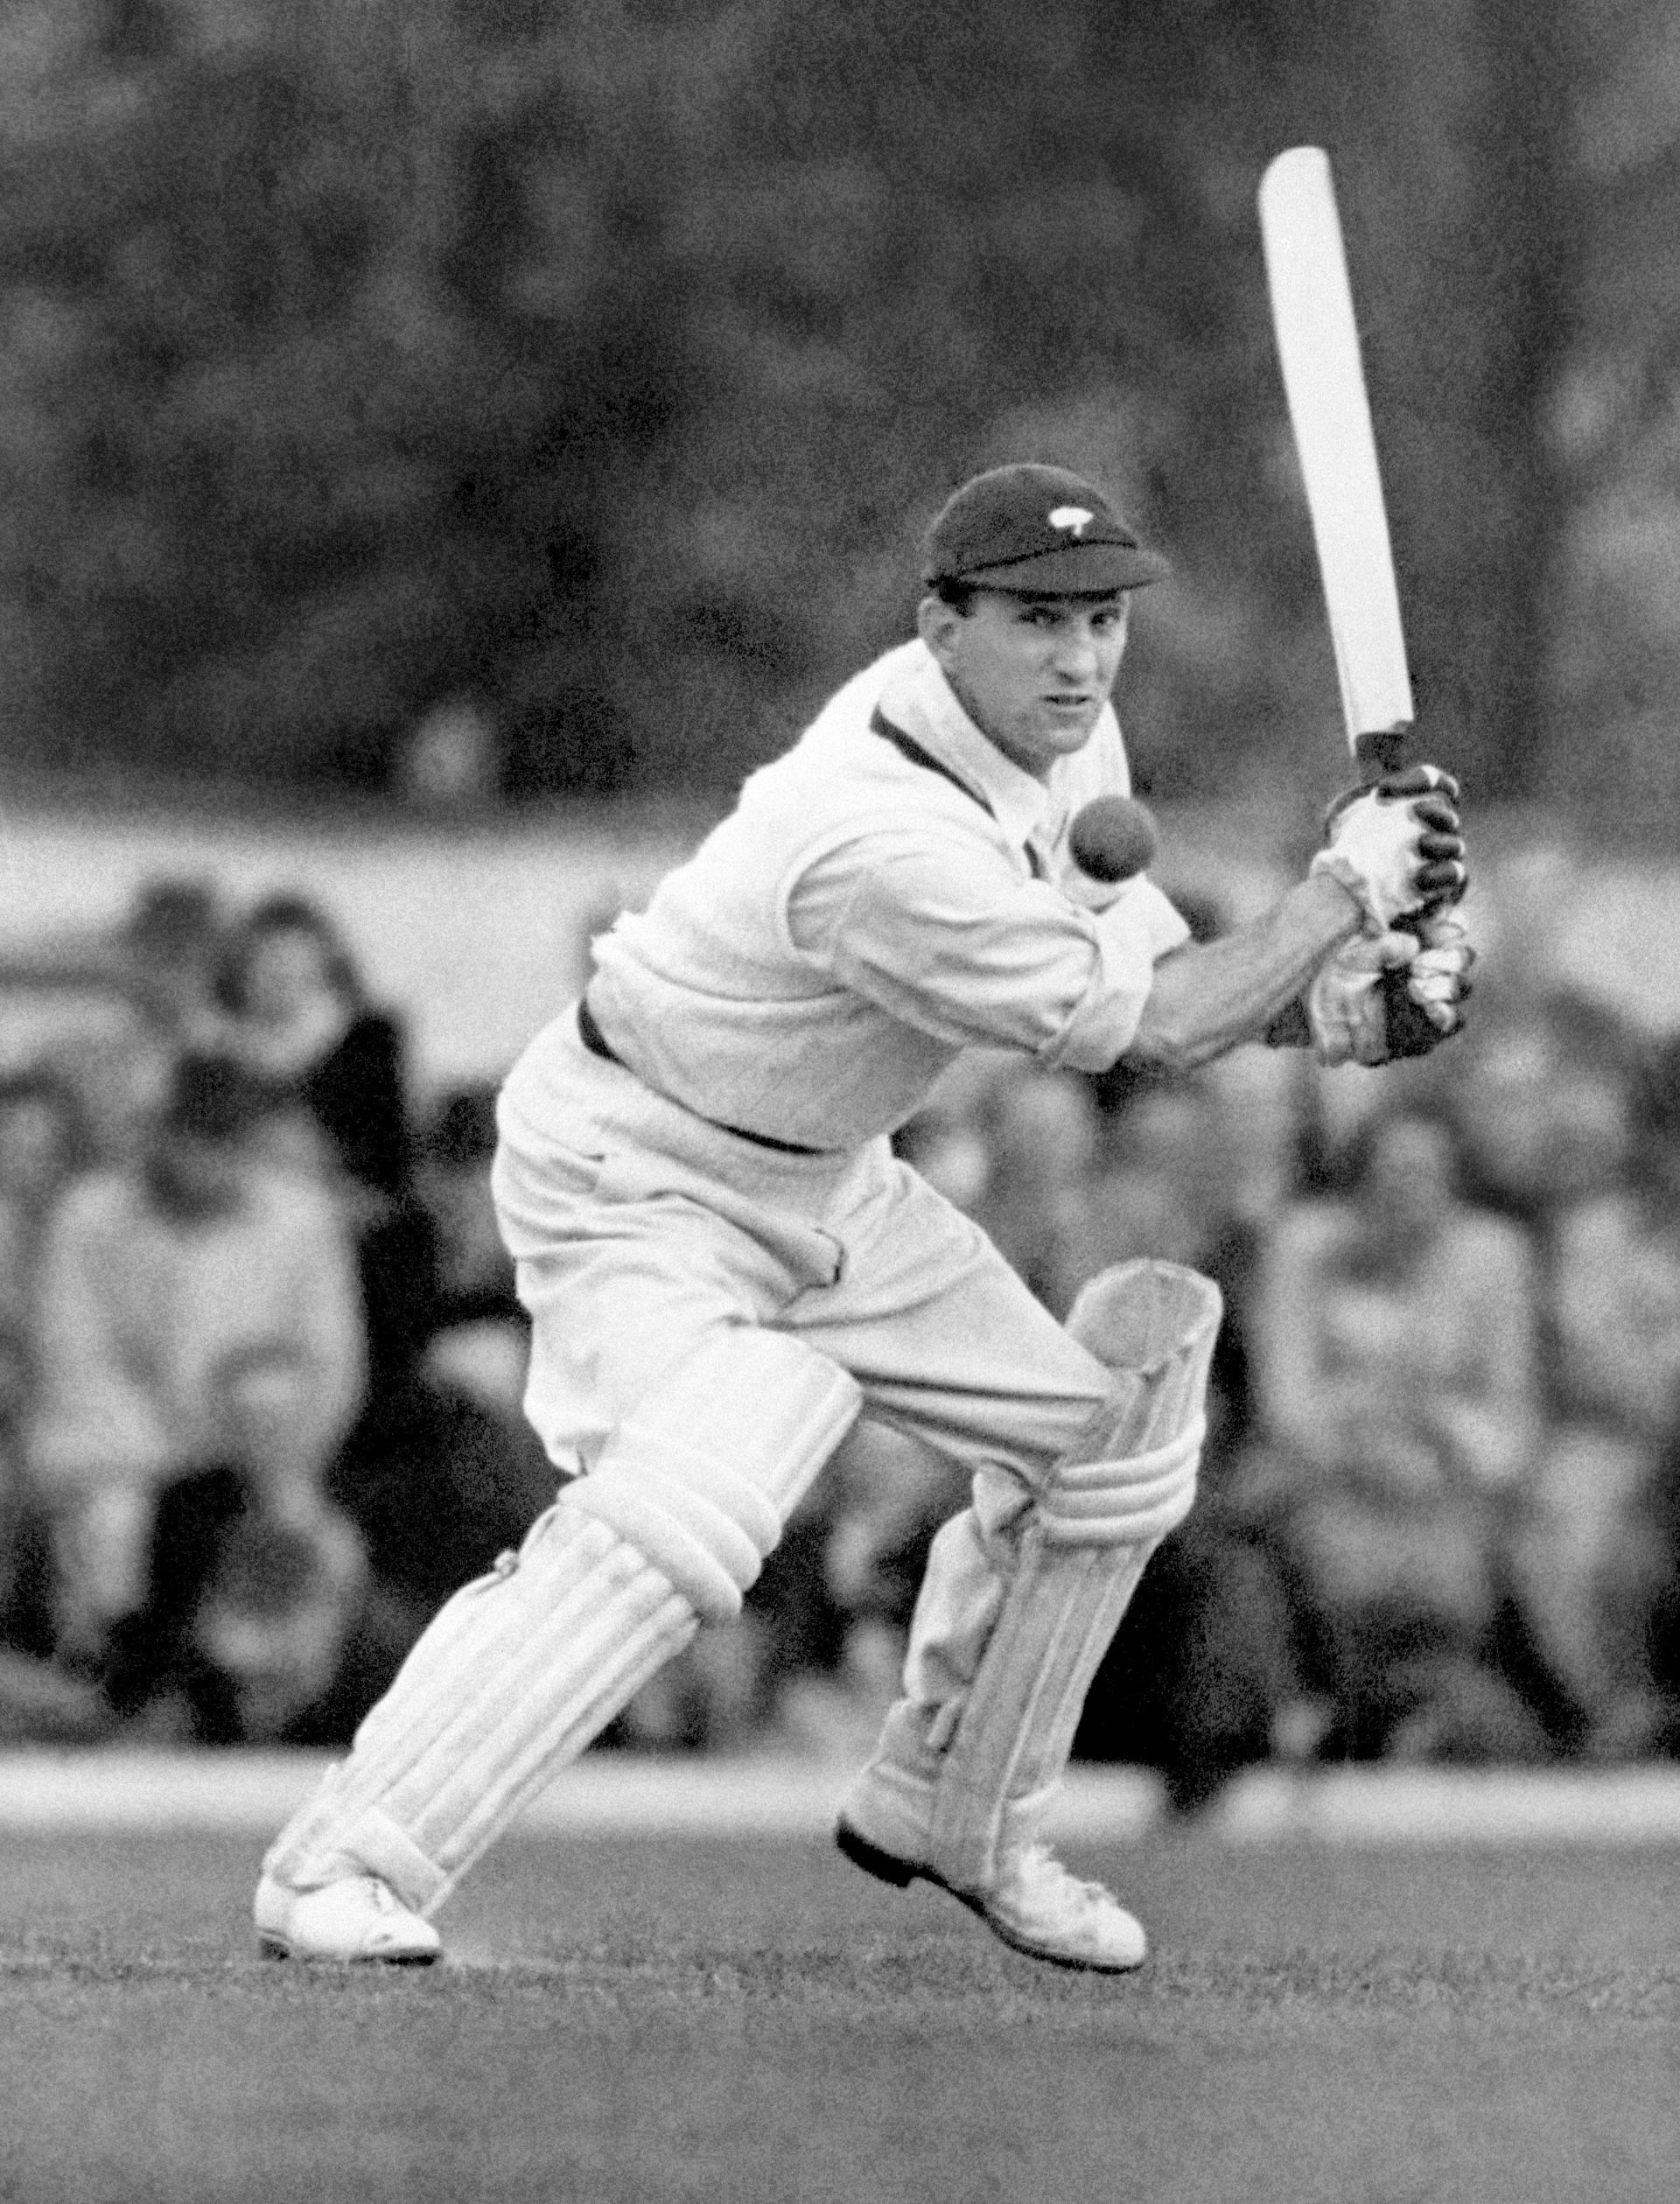 Len Hutton carved out the record Test score of 364 very early in his career